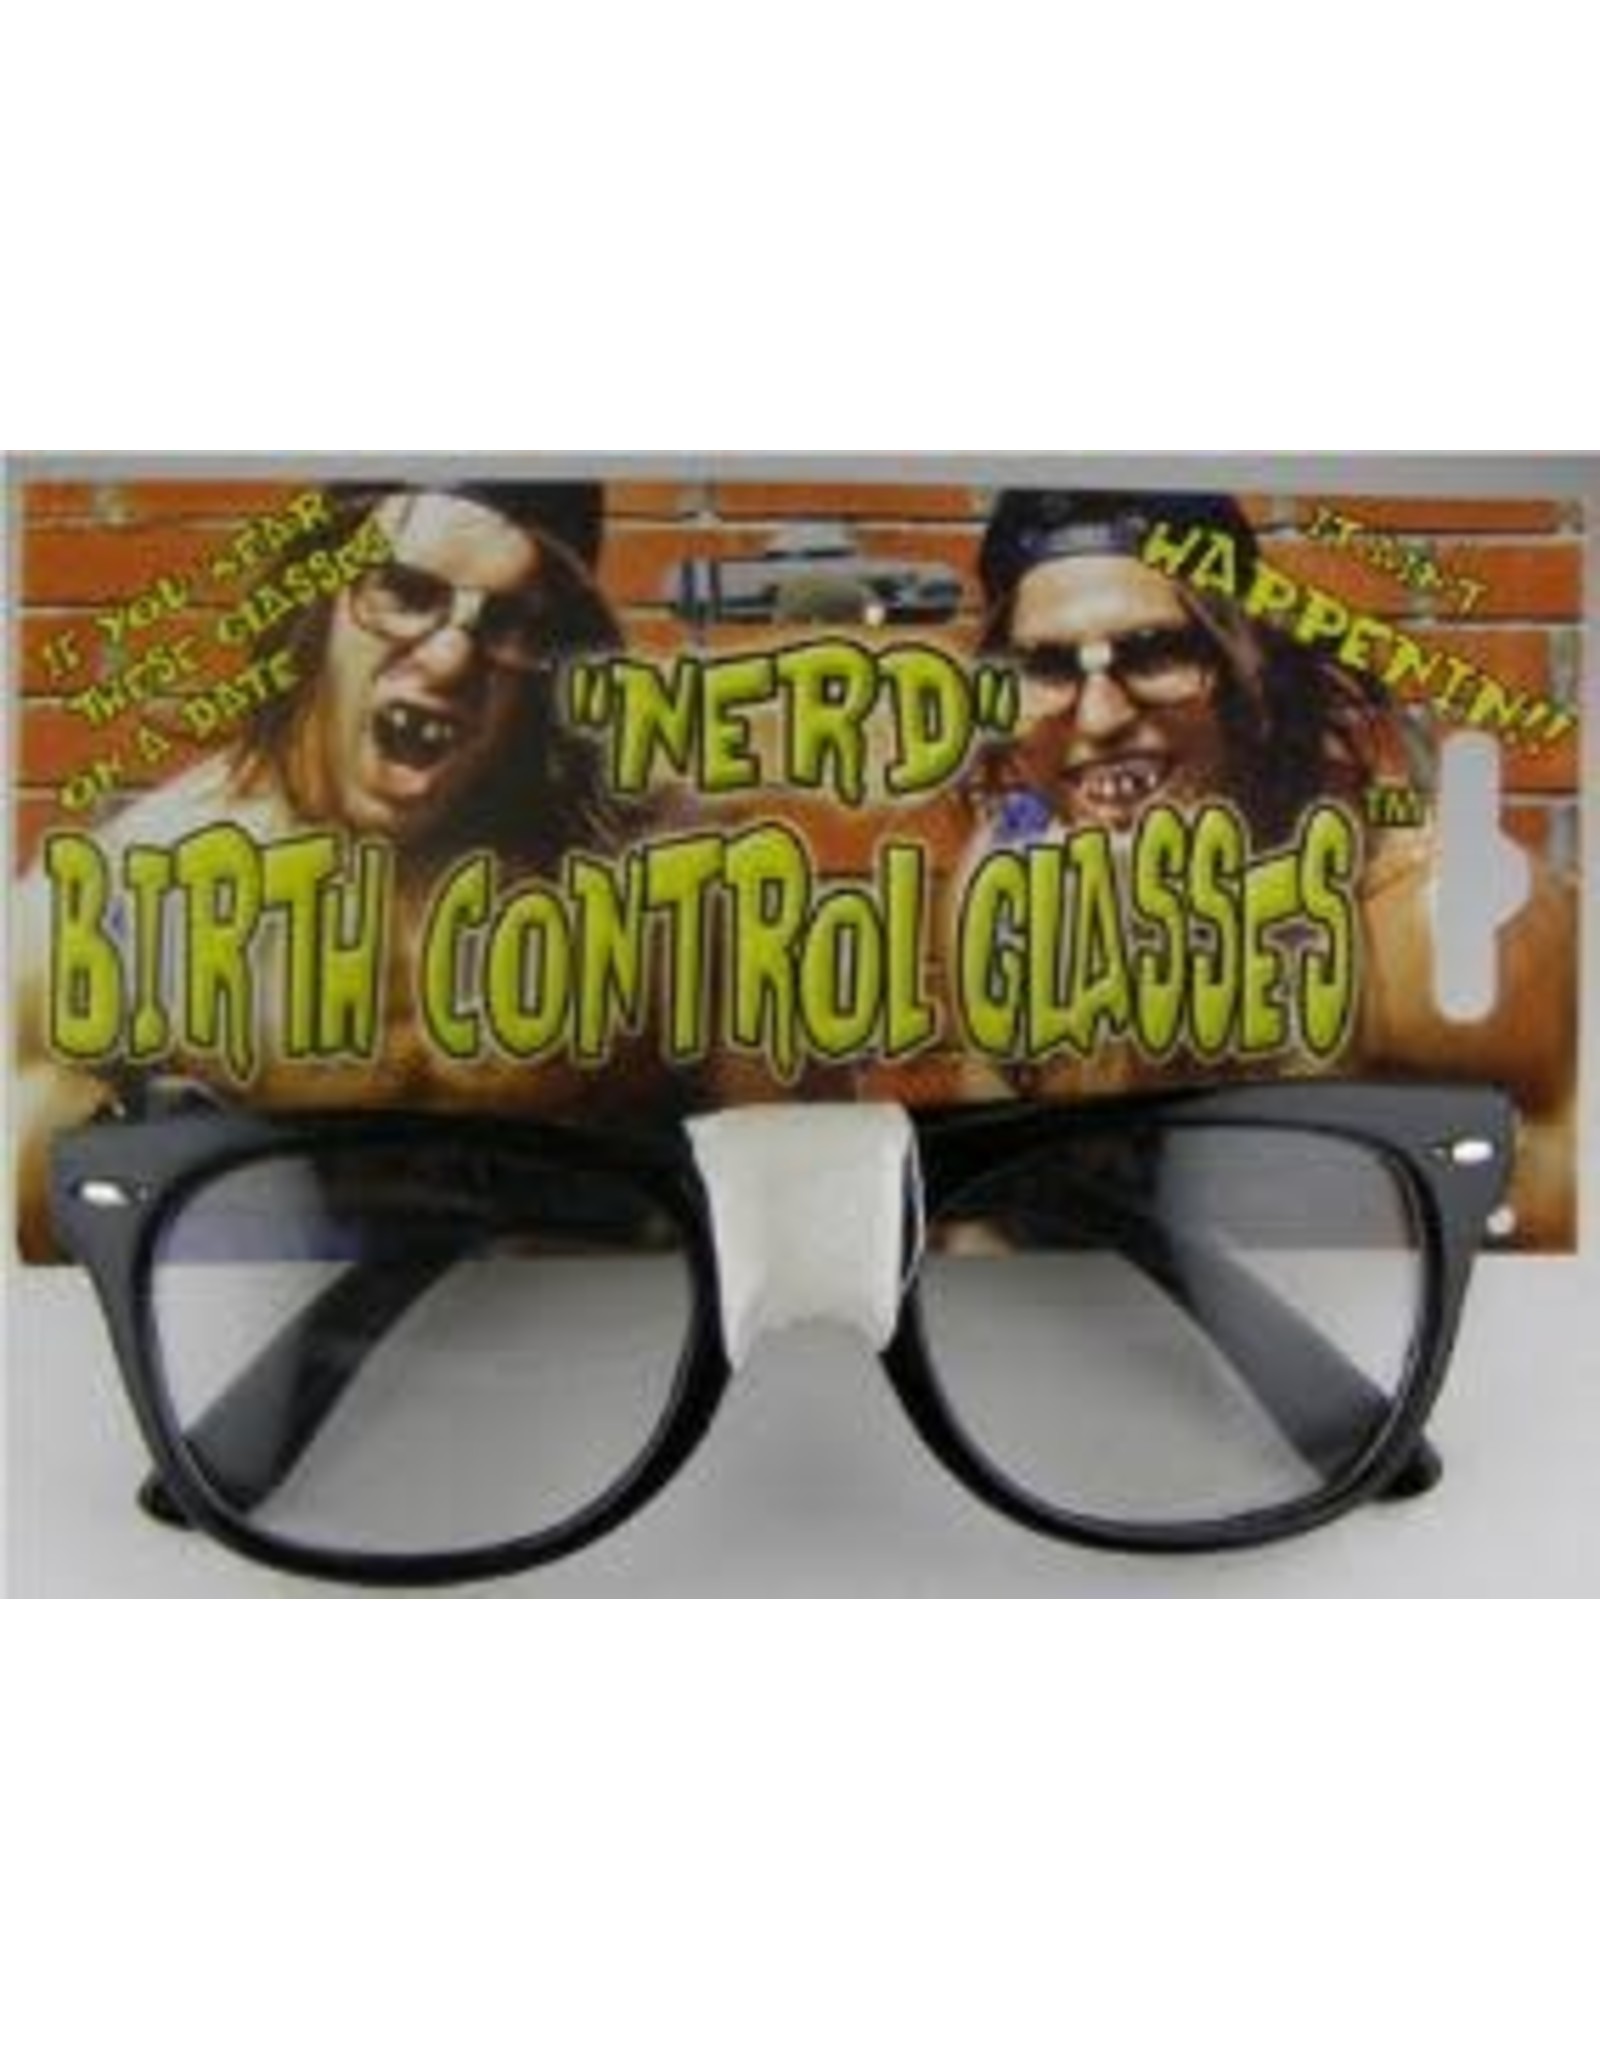 Billy-Bob Products Nerd Glasses